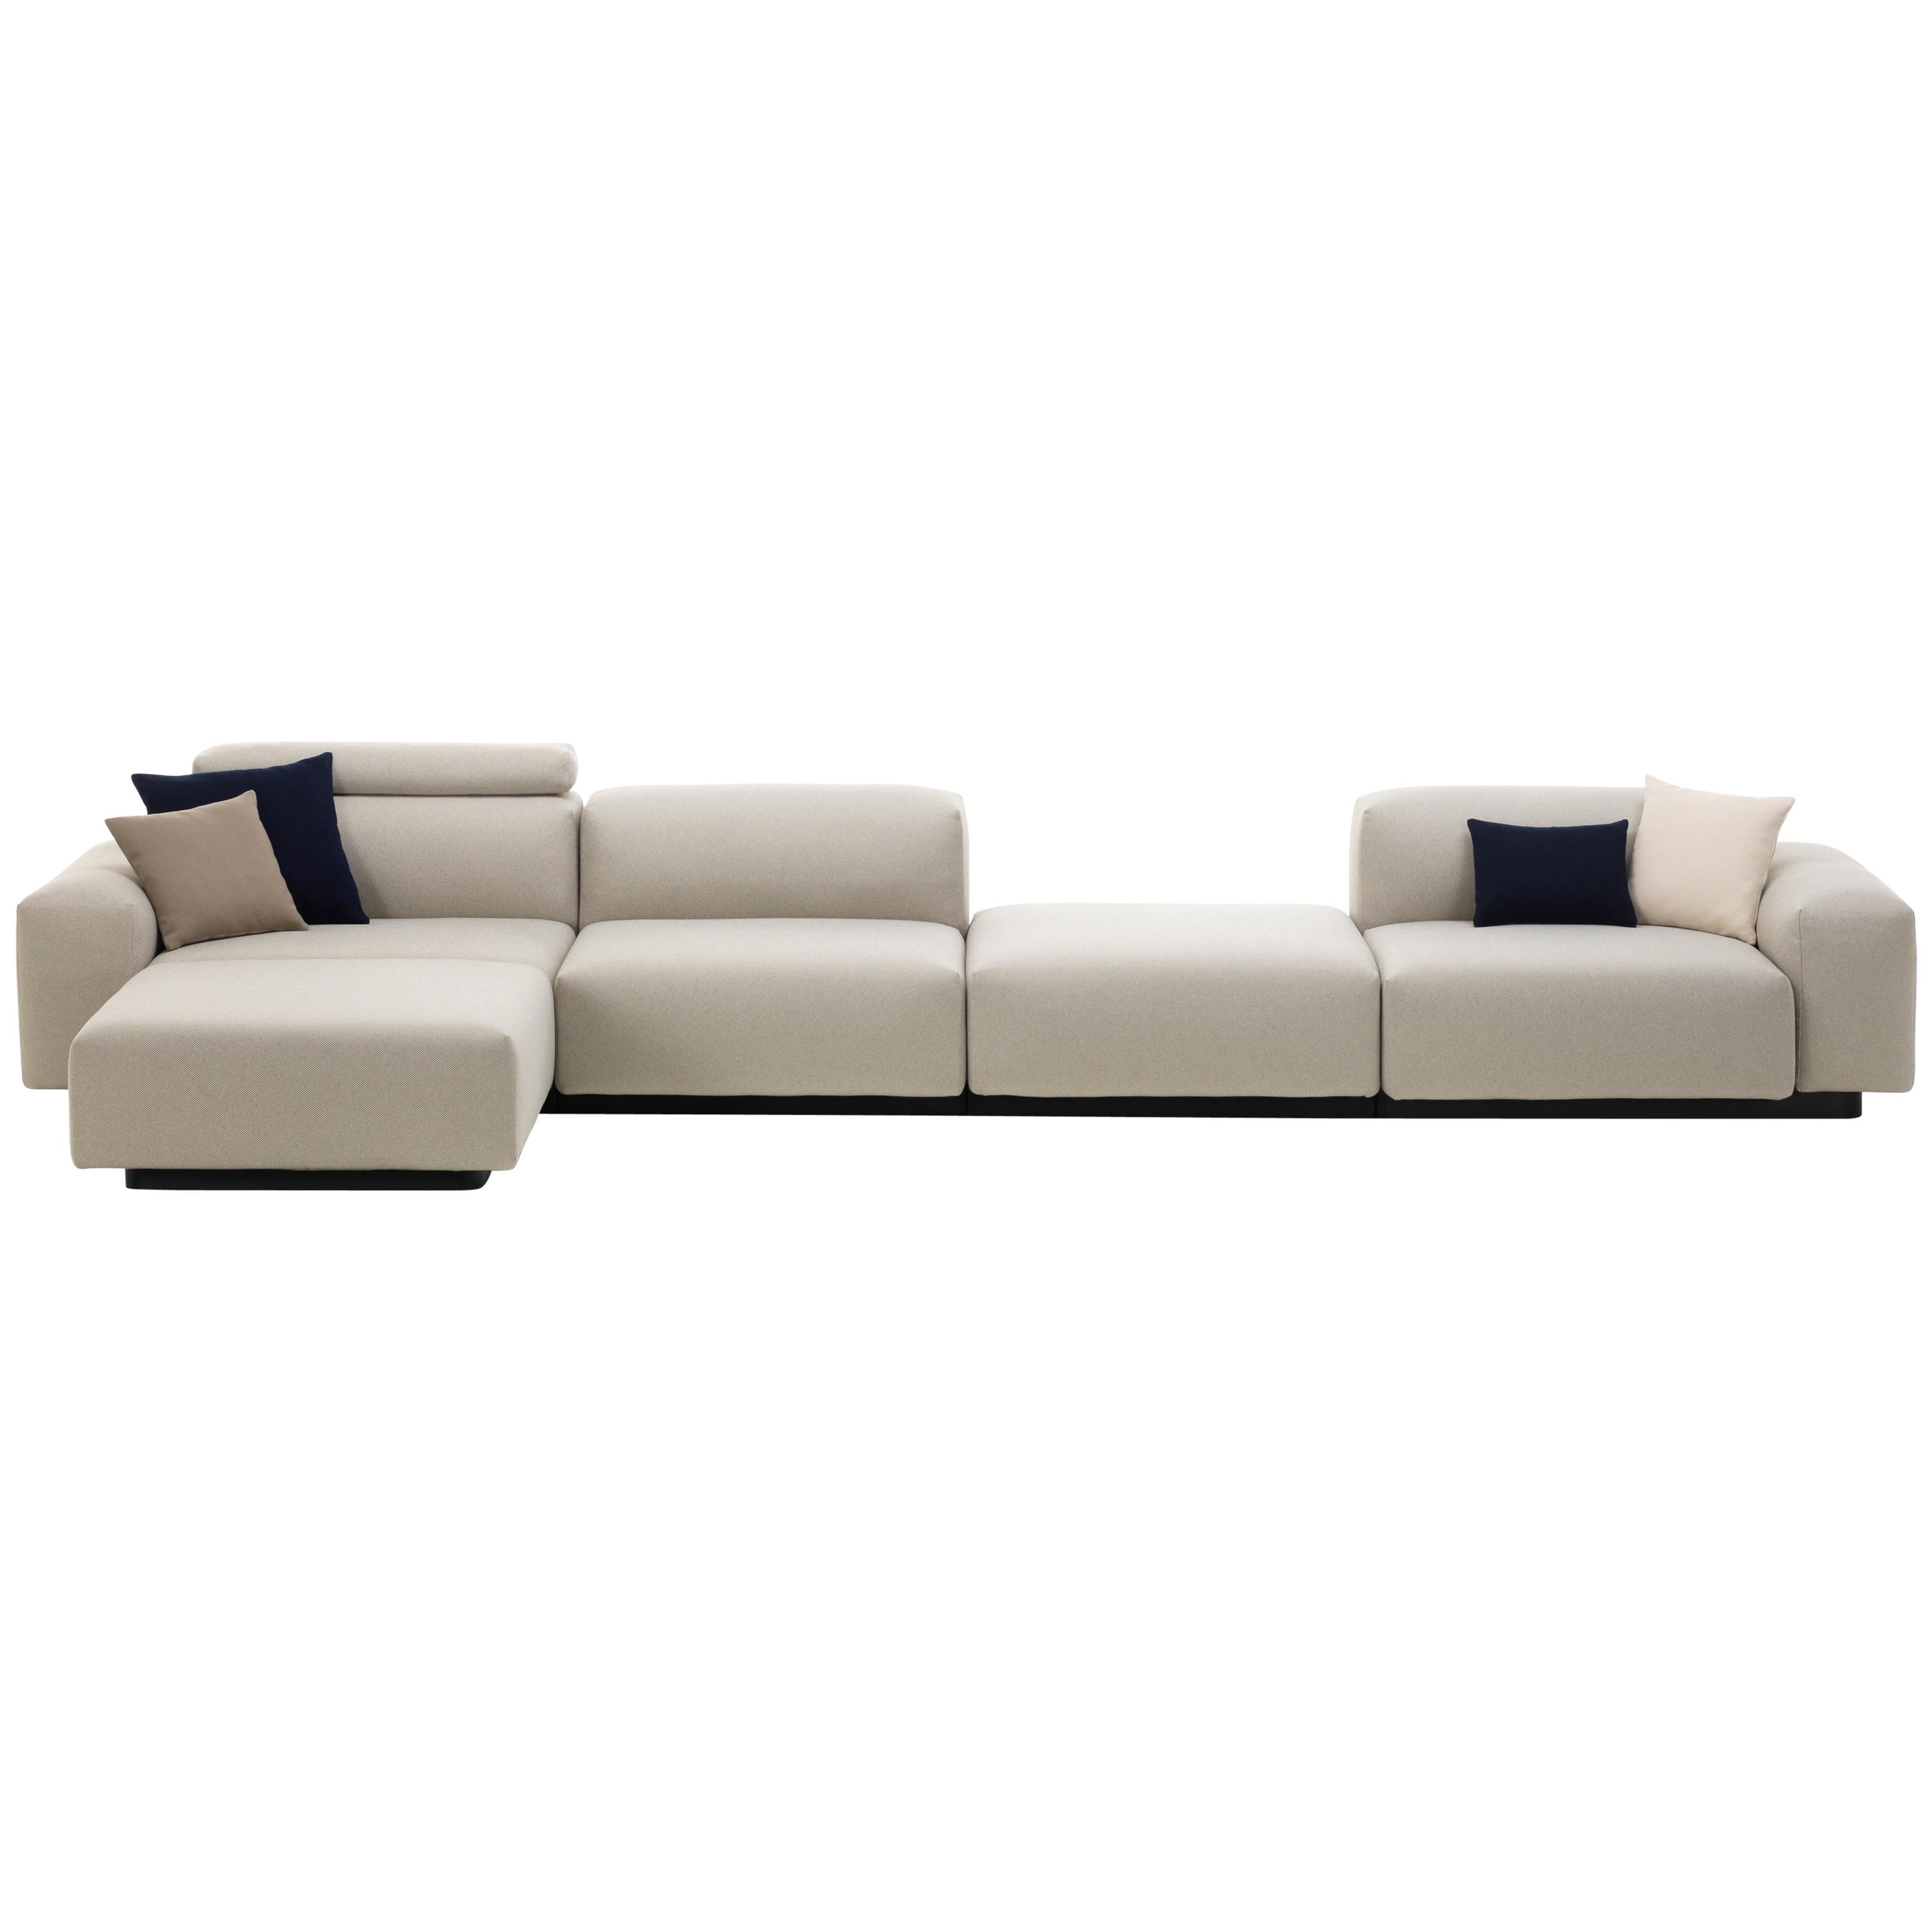 Vitra Soft Modular 4-Seat Sofa with Chaise Lounge & Platform in Pearl Olimpo For Sale